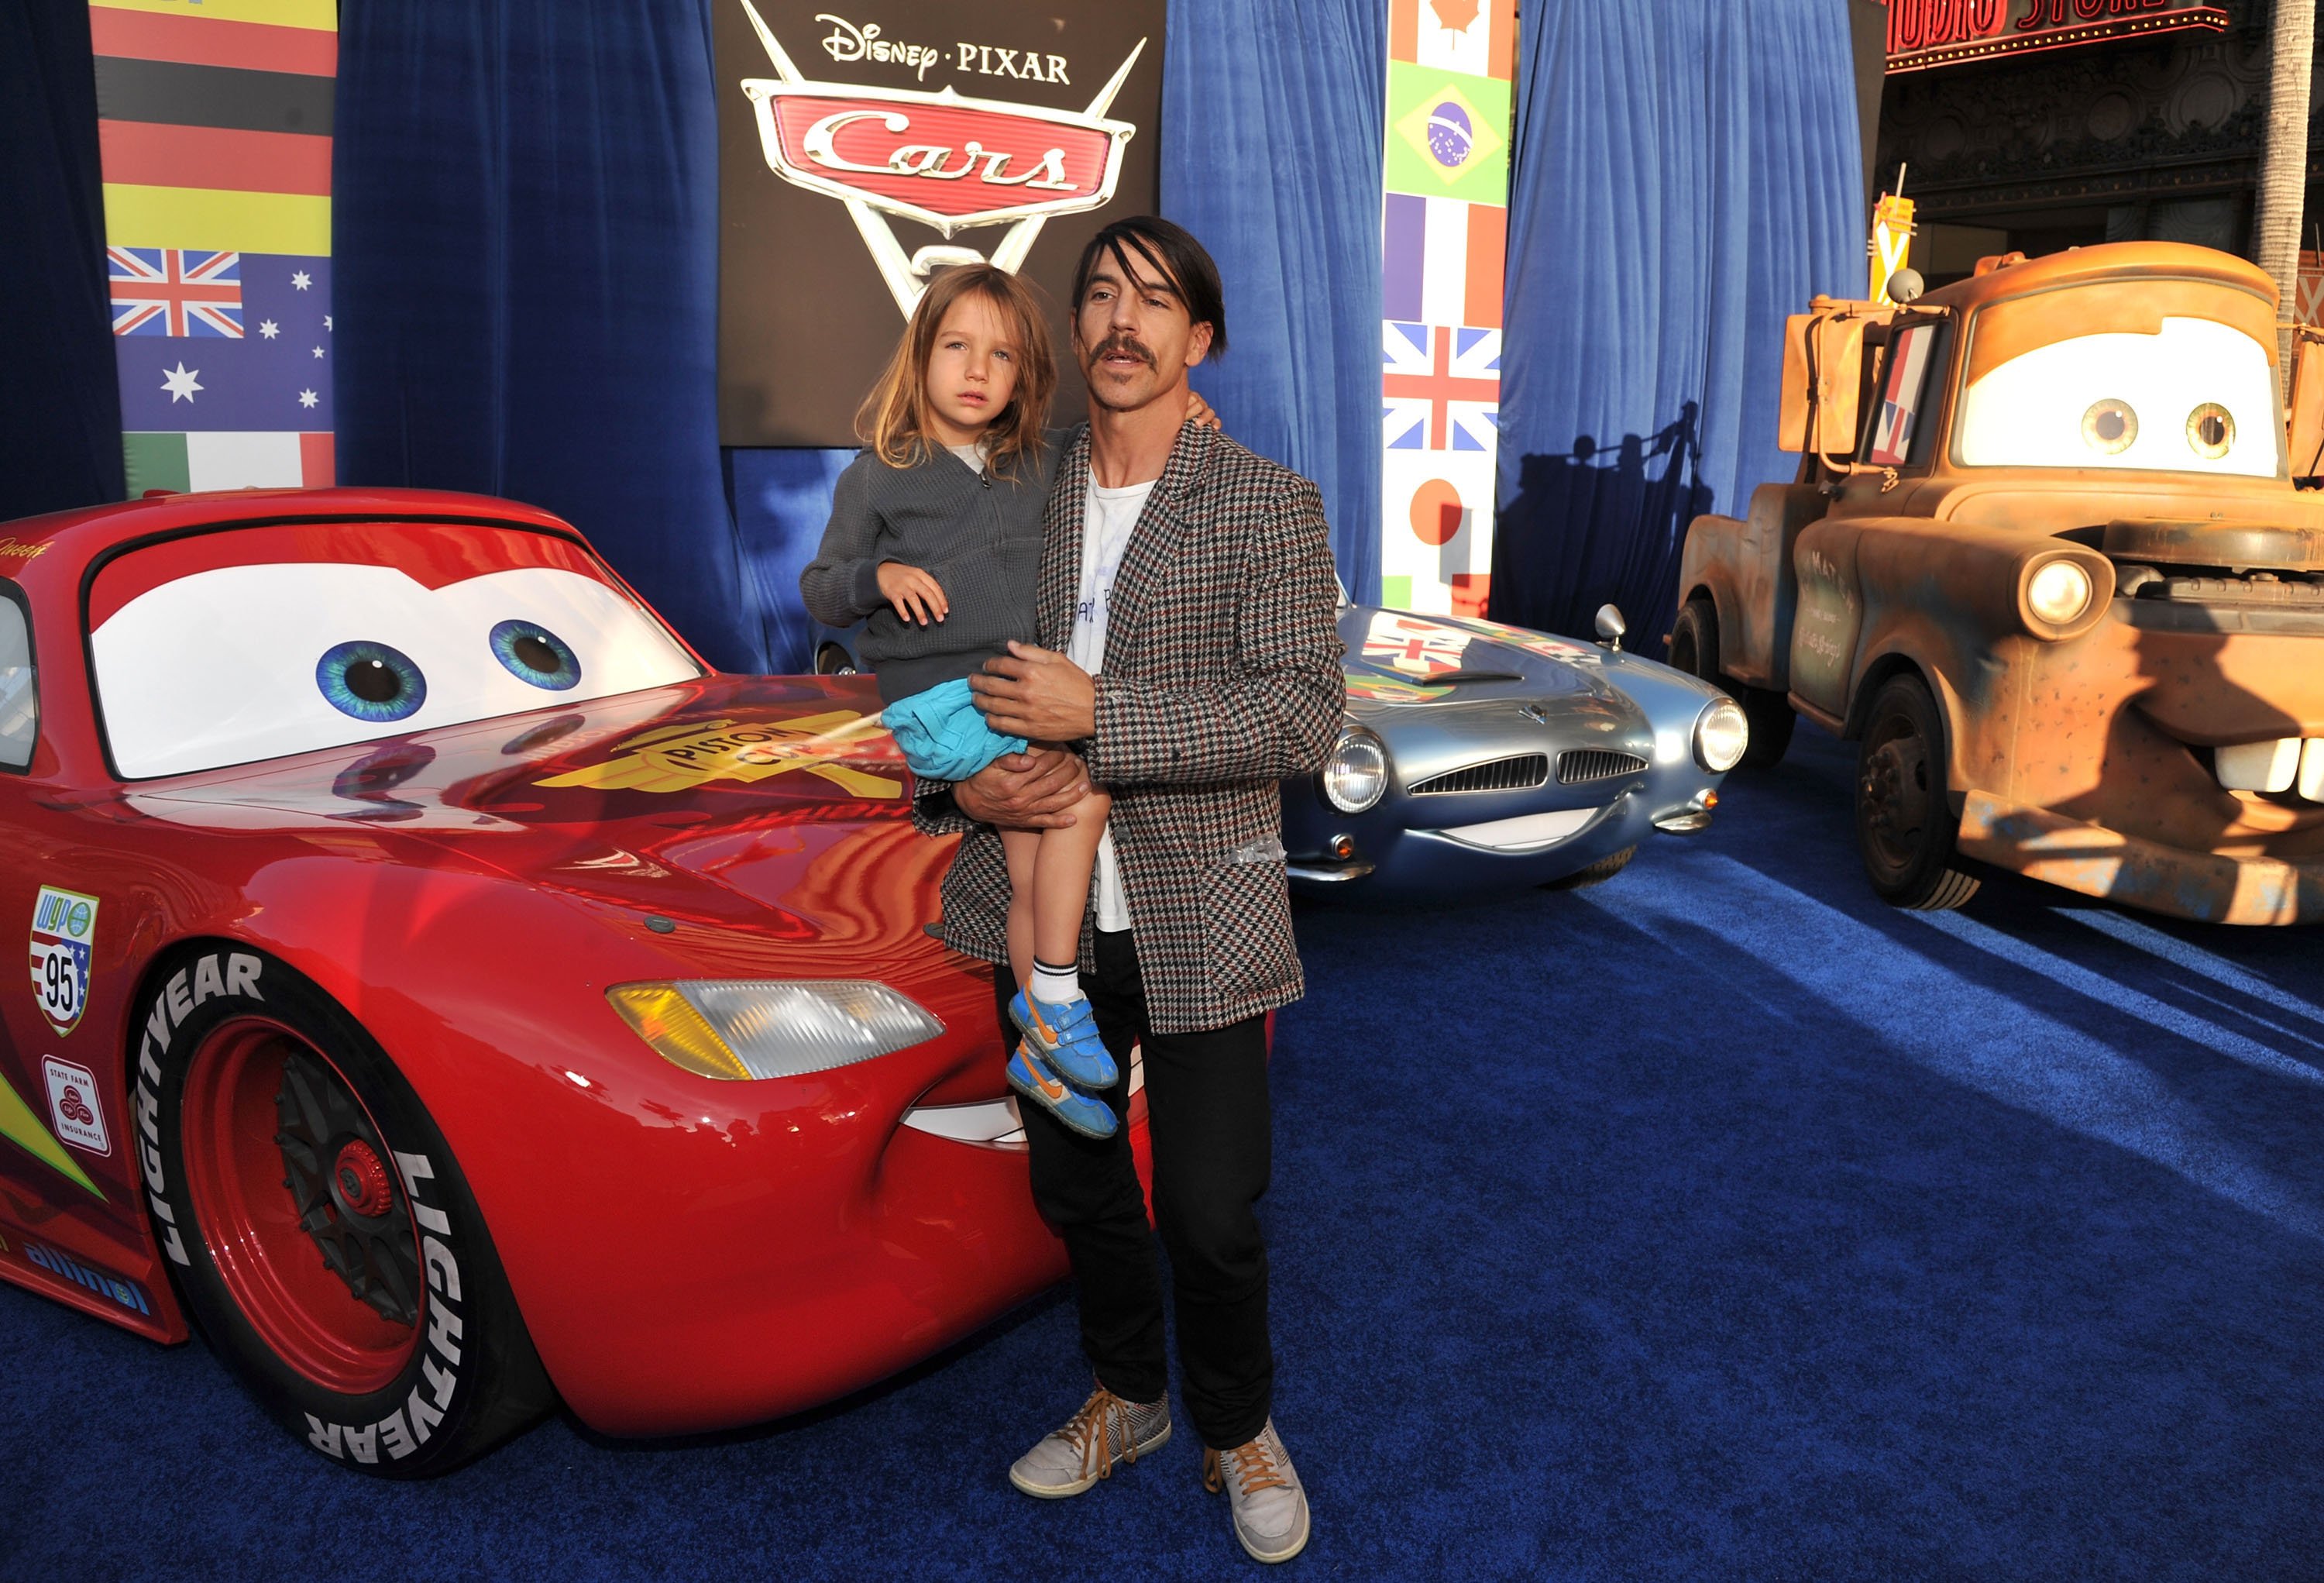 Singer Anthony Kiedis and Everly Bear Kiedis at the "Cars 2" Los Angeles Premiere at the El Capitan Theatre on June 18, 2011 in Hollywood, California. | Source: Getty Images